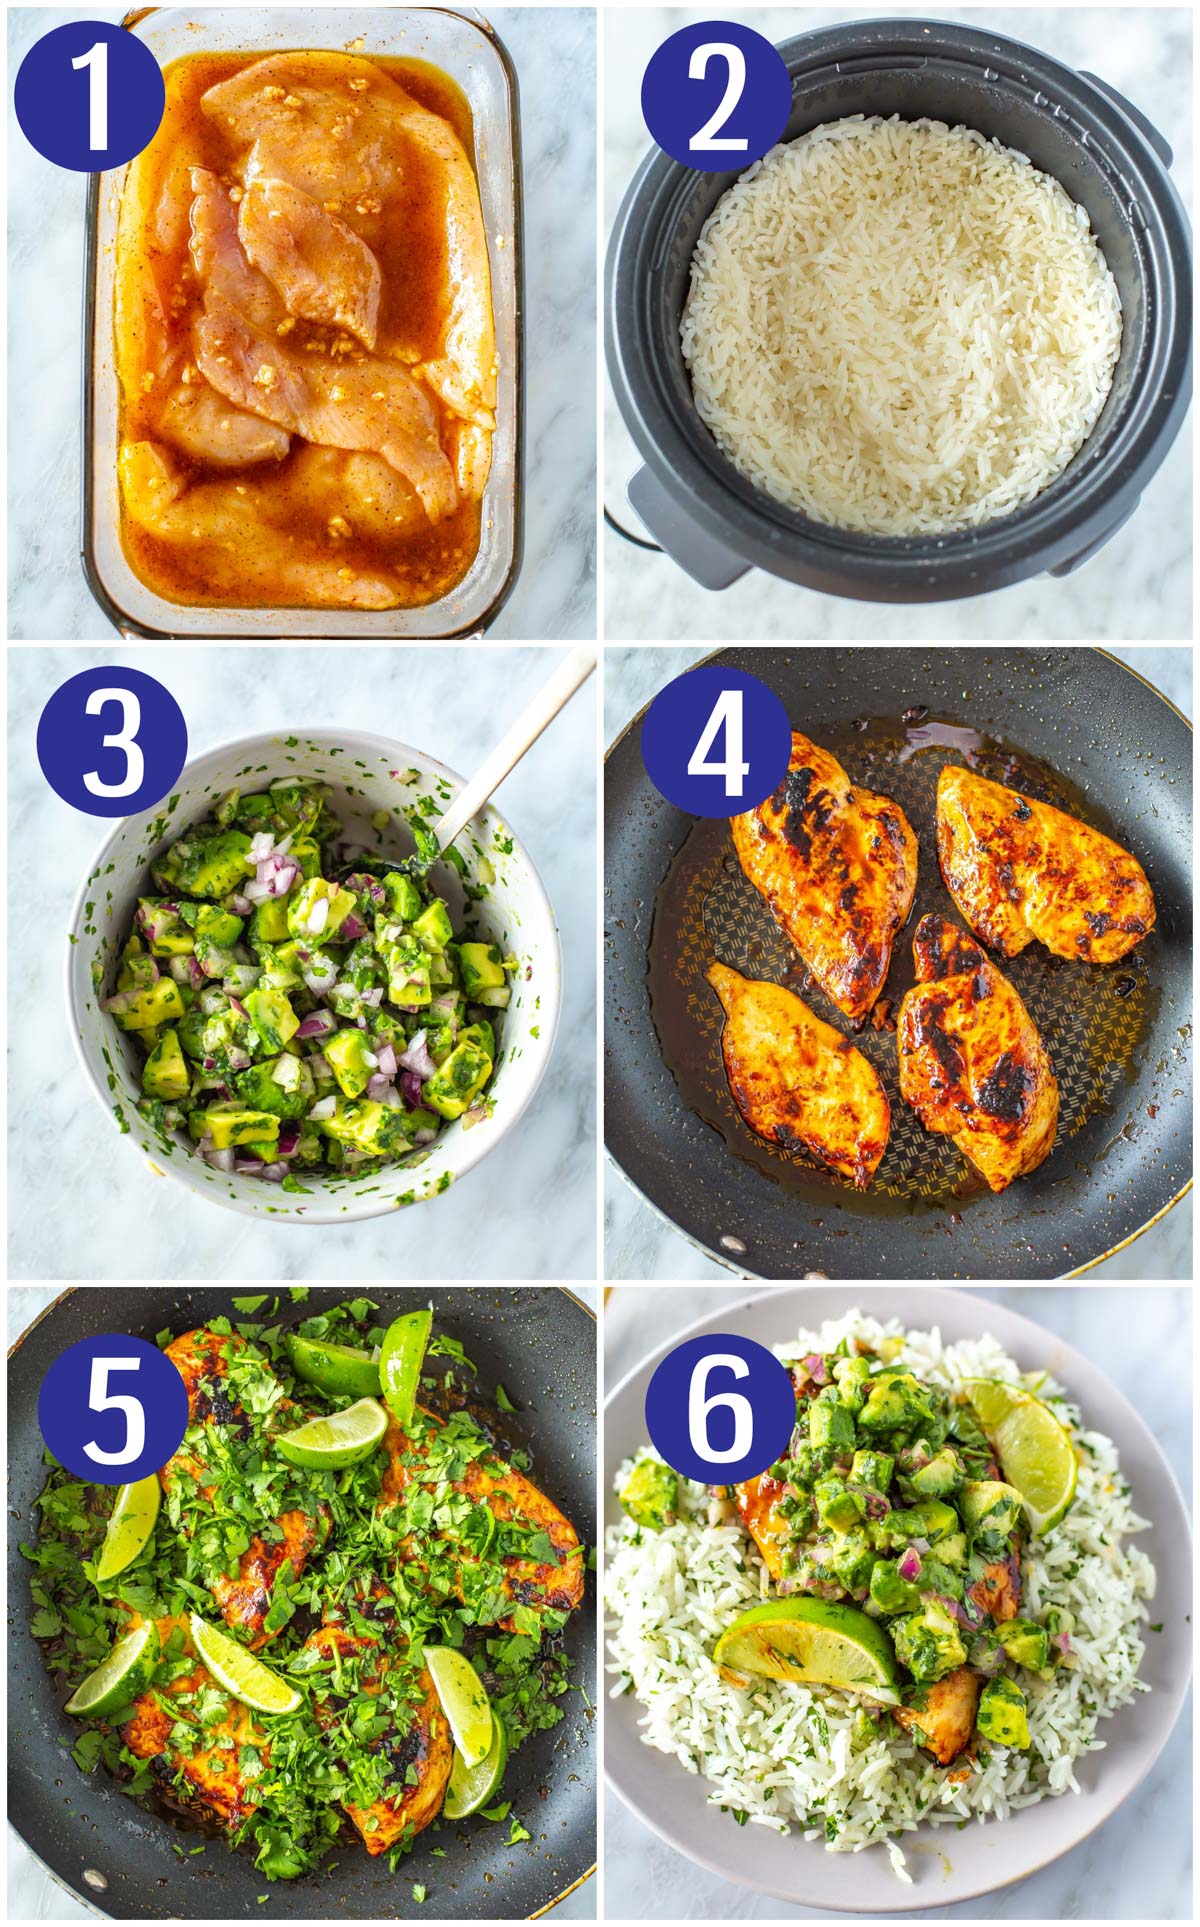 Step-by-step instructions collage for making cilantro lime chicken and rice: marinate chicken, make rice, make avocado salsa, cook chicken, add cilantro and limes, serve.